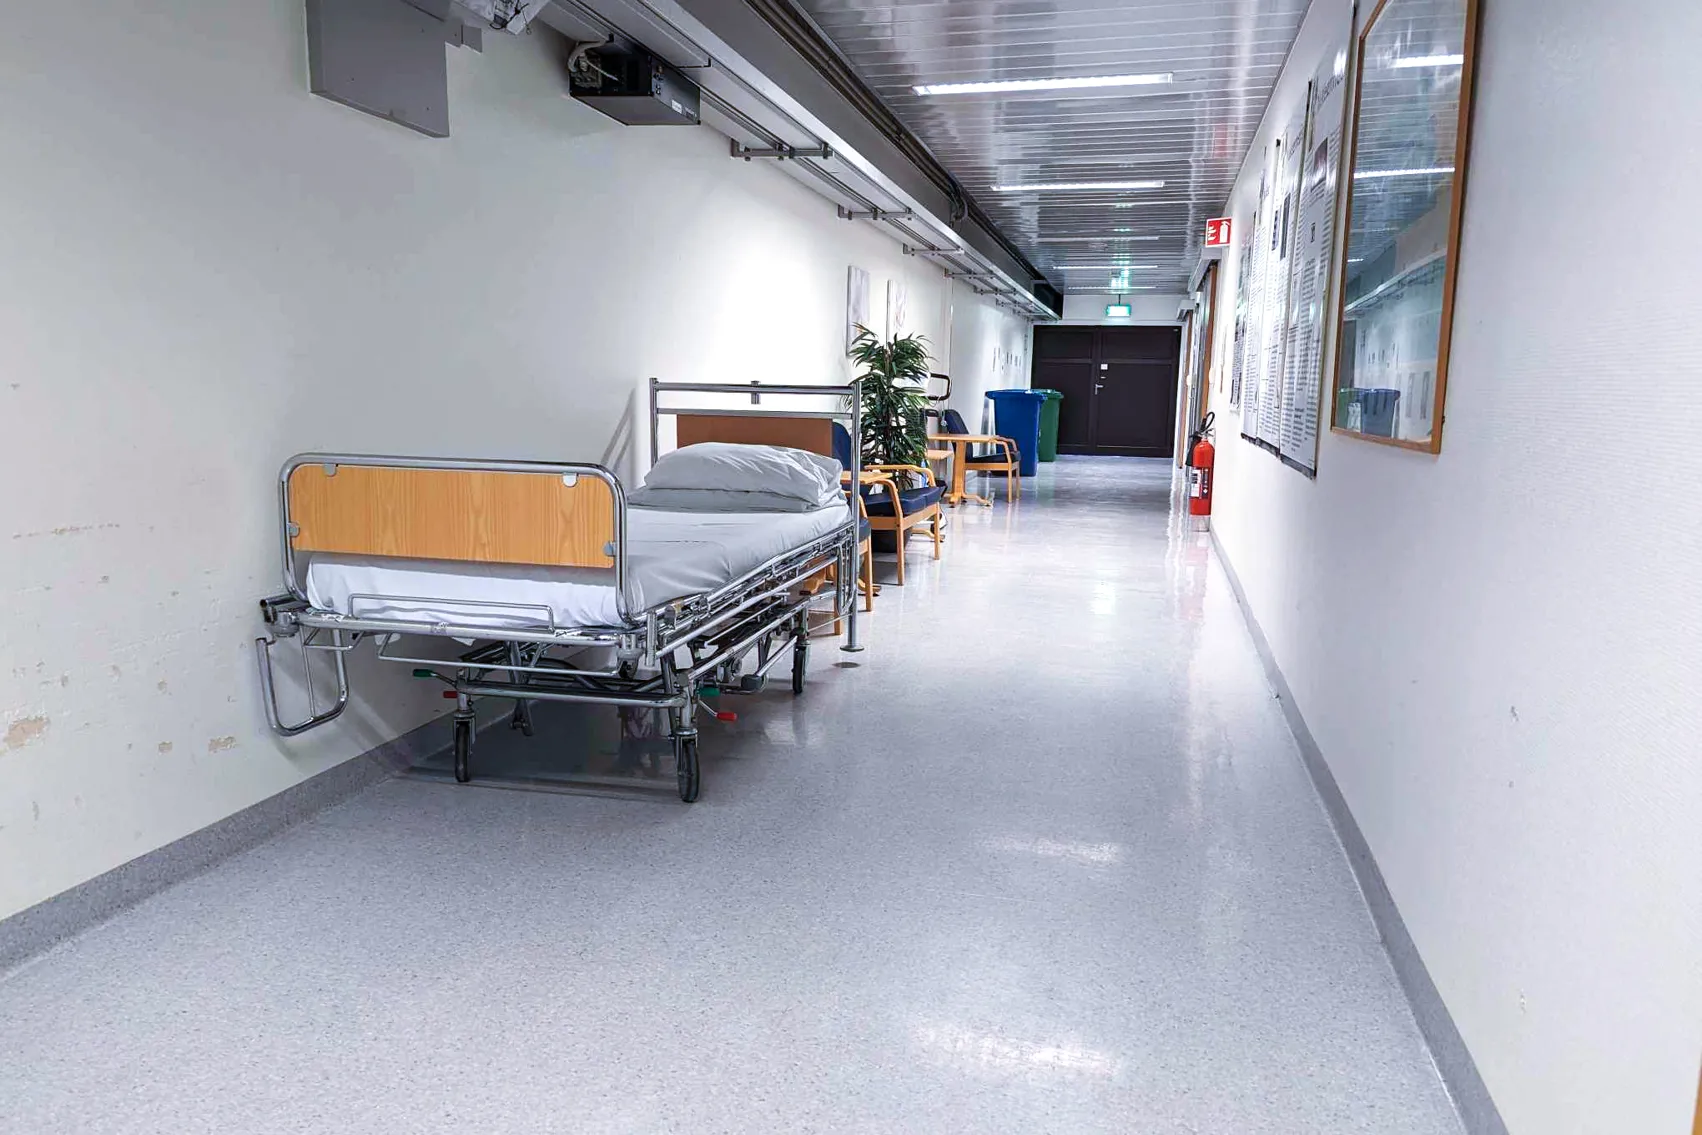 A hospital room with beds